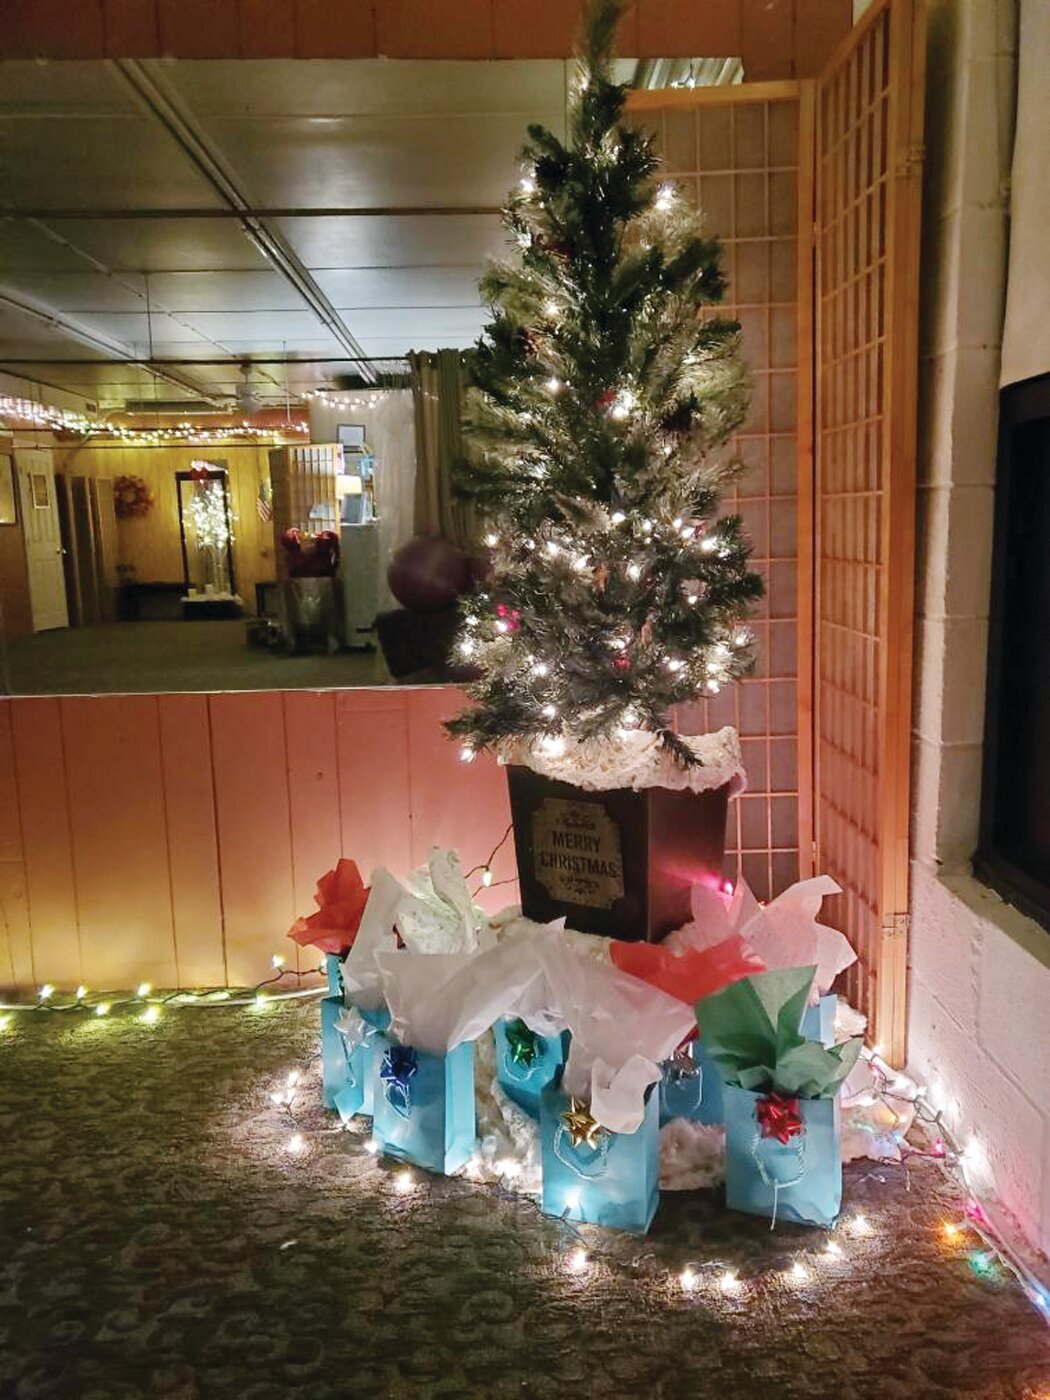 The spirit of Christmas is alive and well at West Shore Wellness on Sandy Lane.  Give yourself and your loved ones a gift of self-care this holiday season!